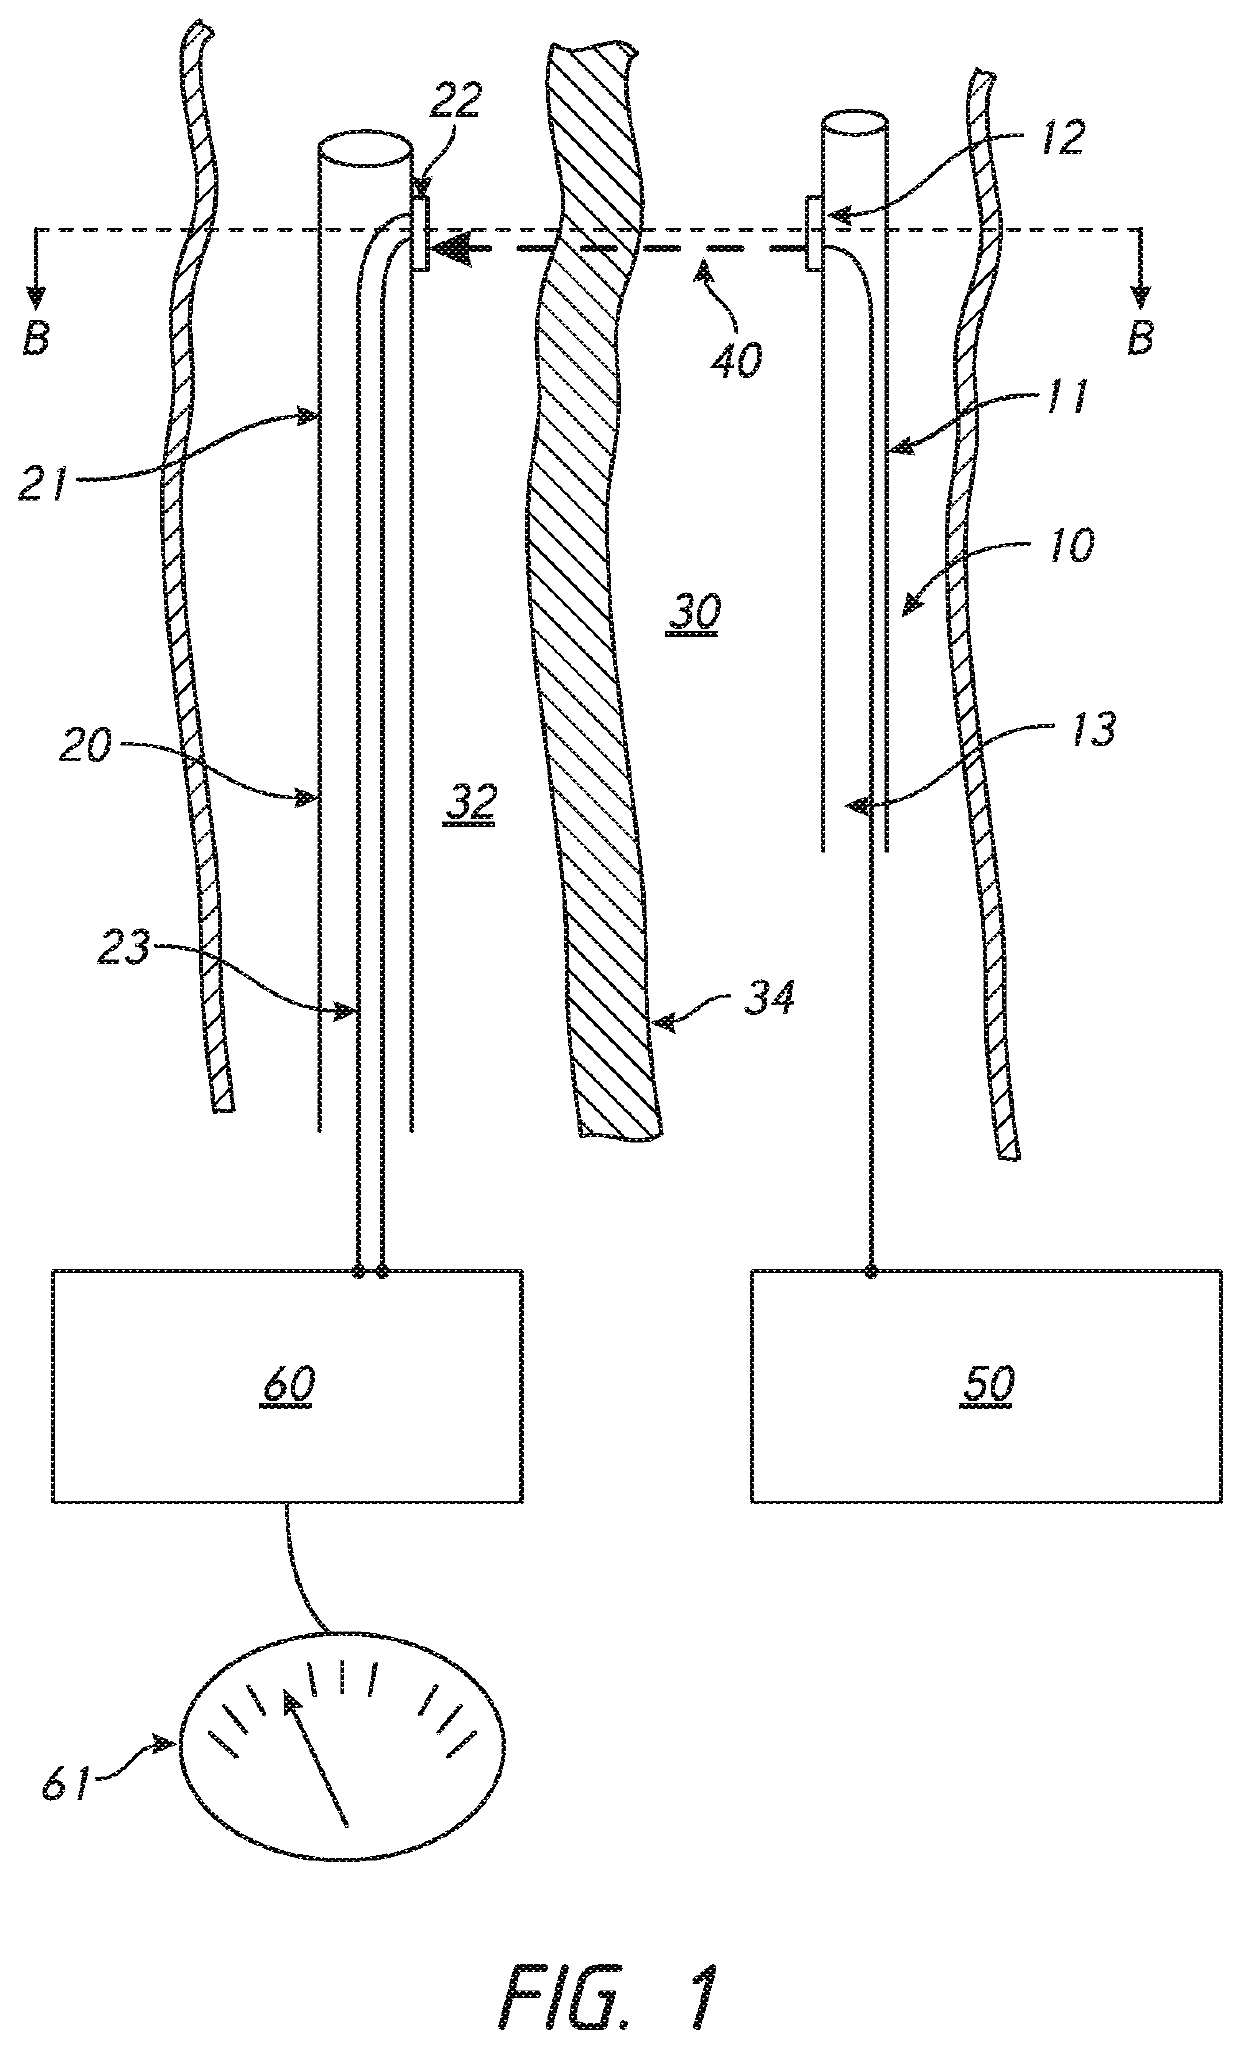 Methods for routing a guidewire from a first vessel and through a second vessel in lower extremity vasculature